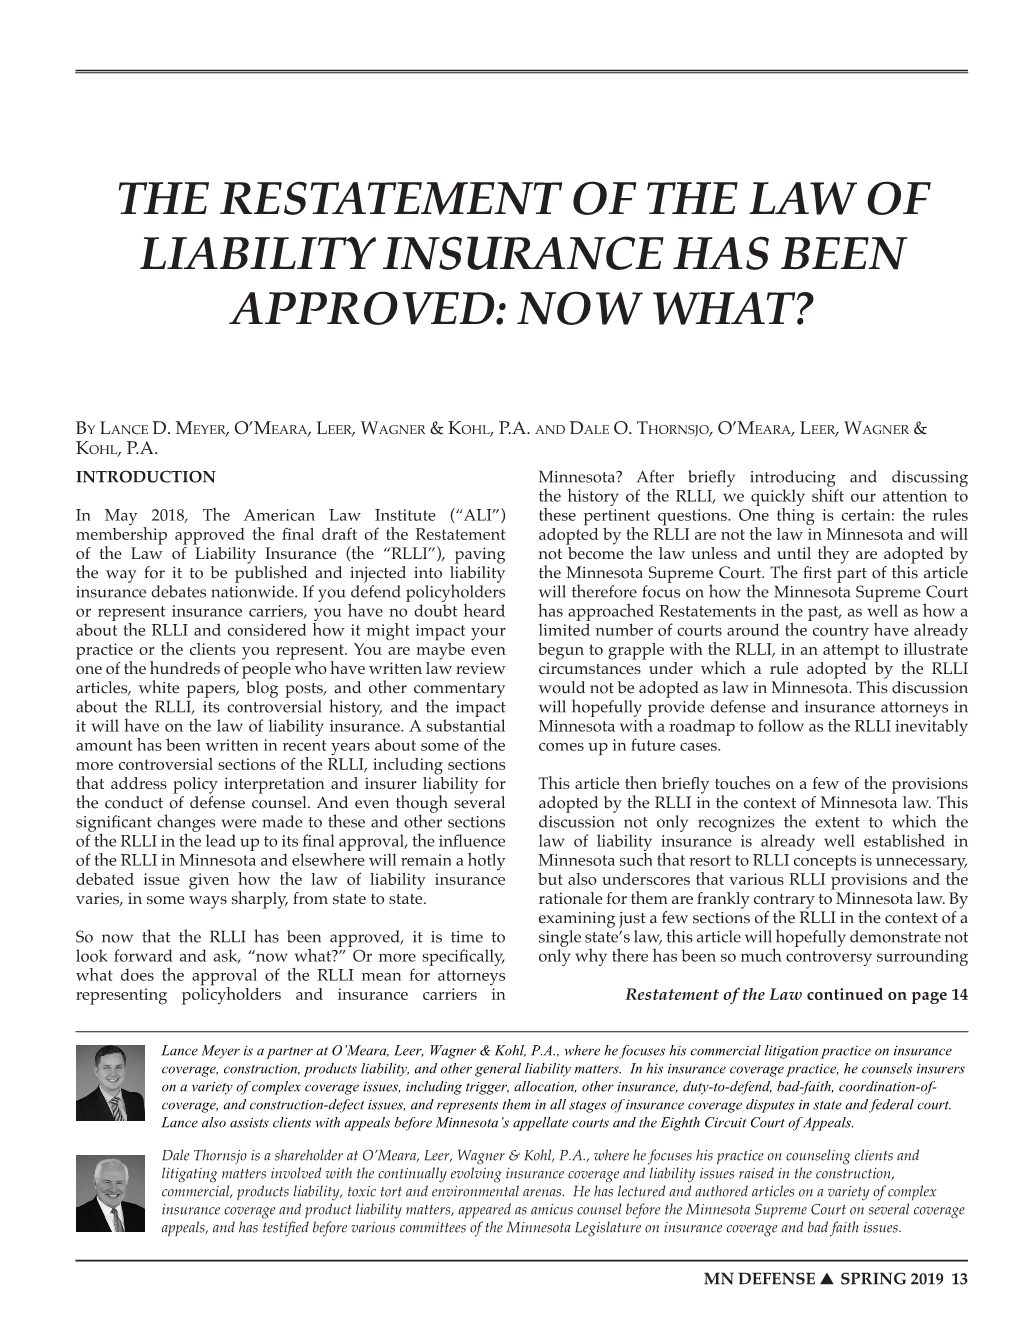 The Restatement of the Law of Liability Insurance Has Been Approved: Now What?